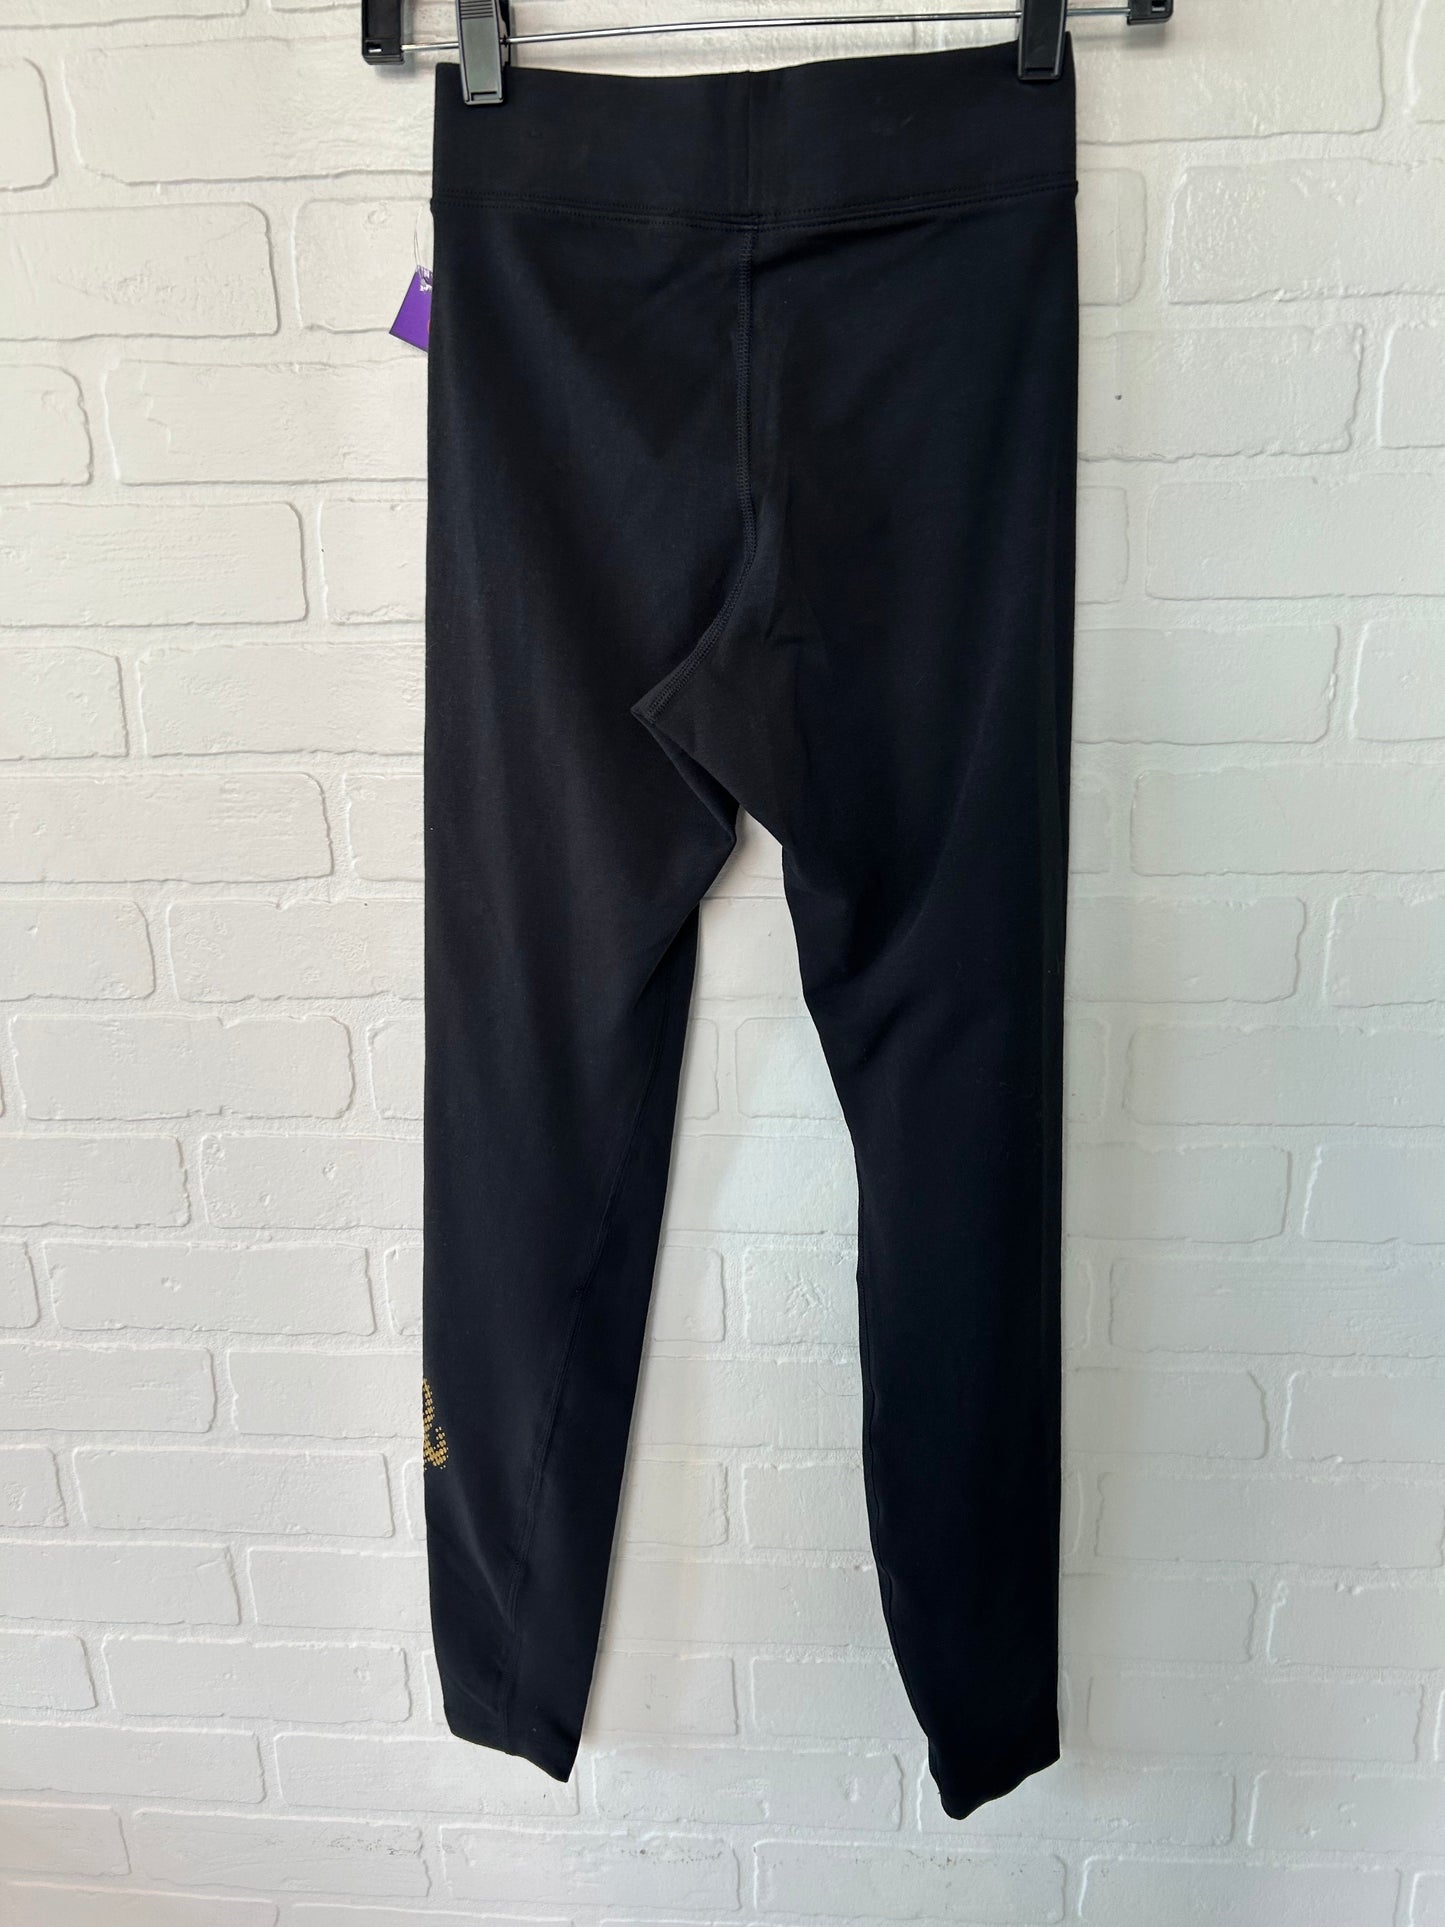 Athletic Leggings By Nike Apparel  Size: 0